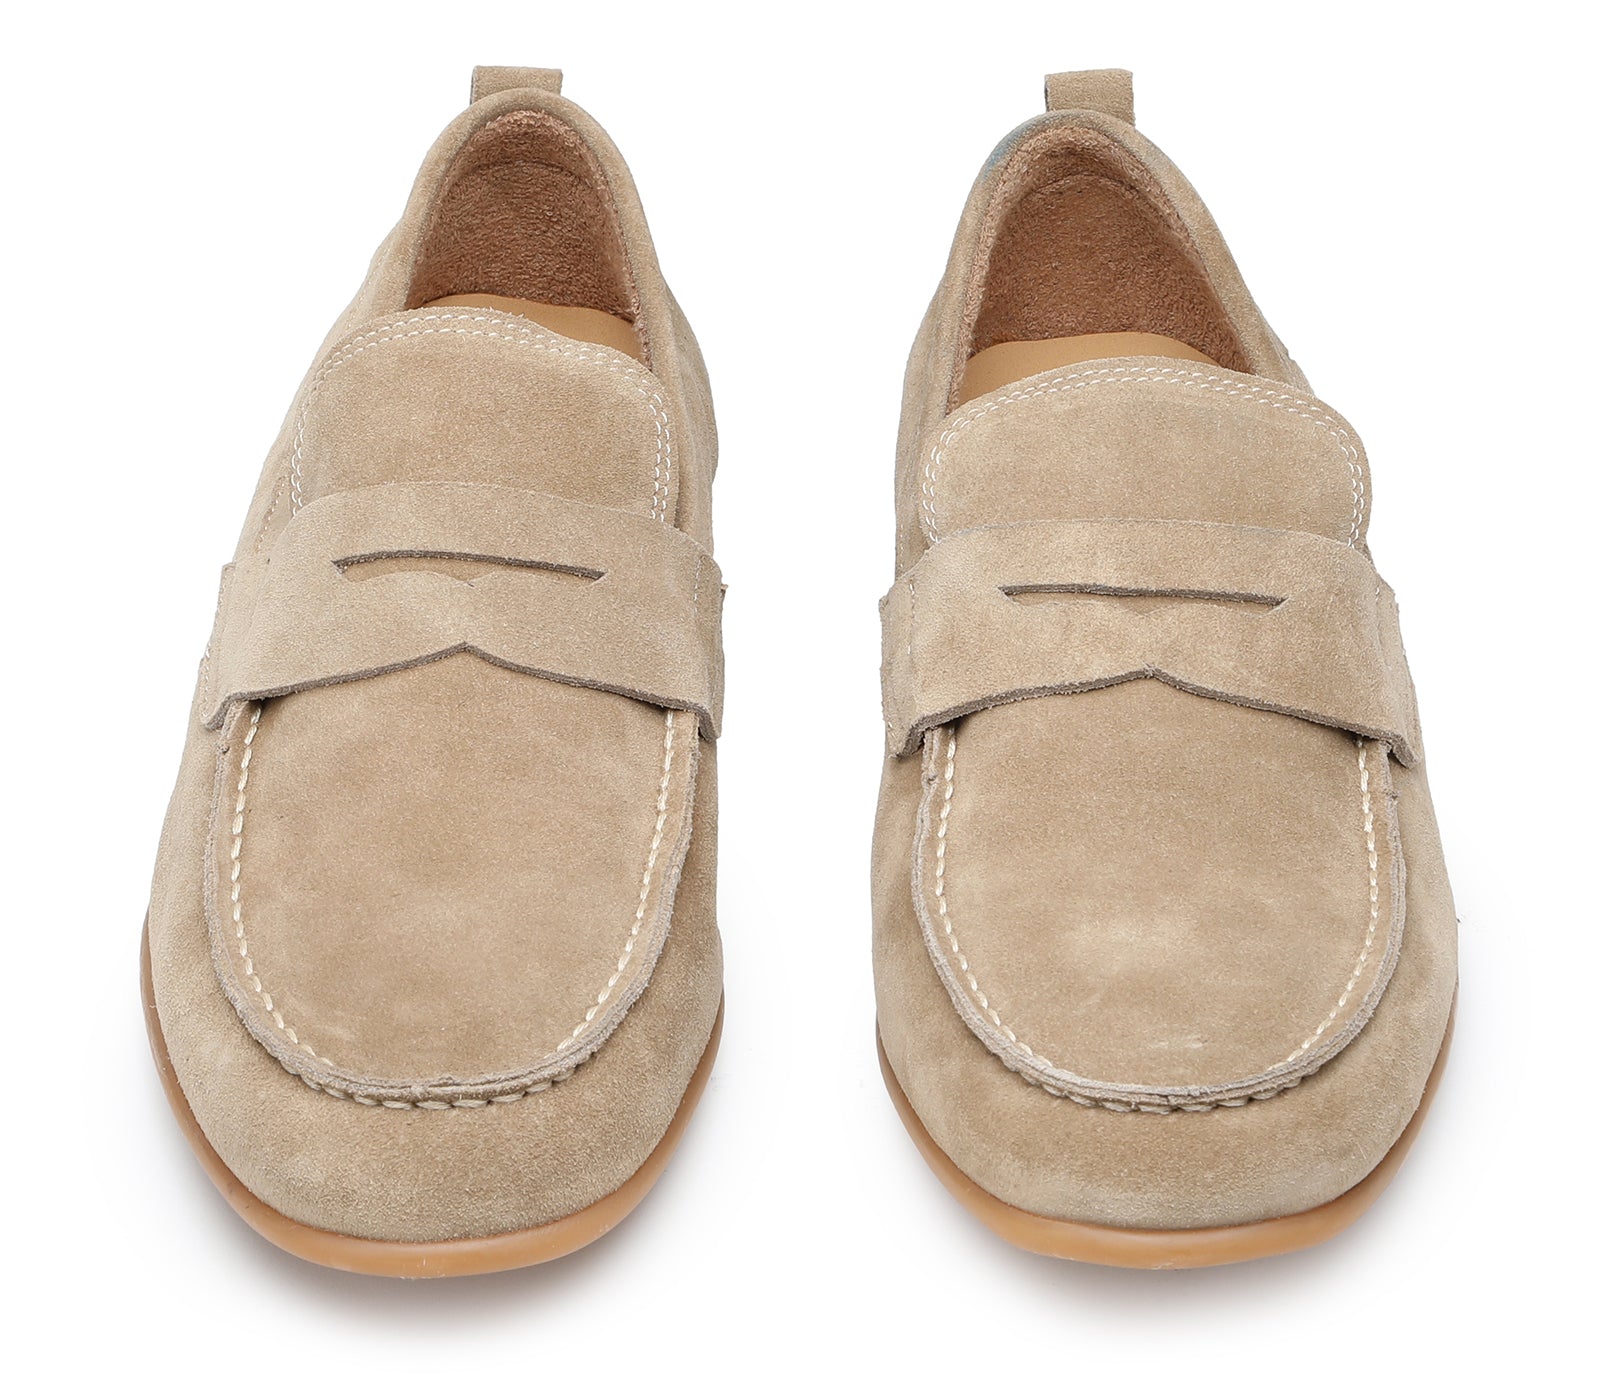 Men's Moccasins in Soft, Sand-colored Suede with Rubber Sole 